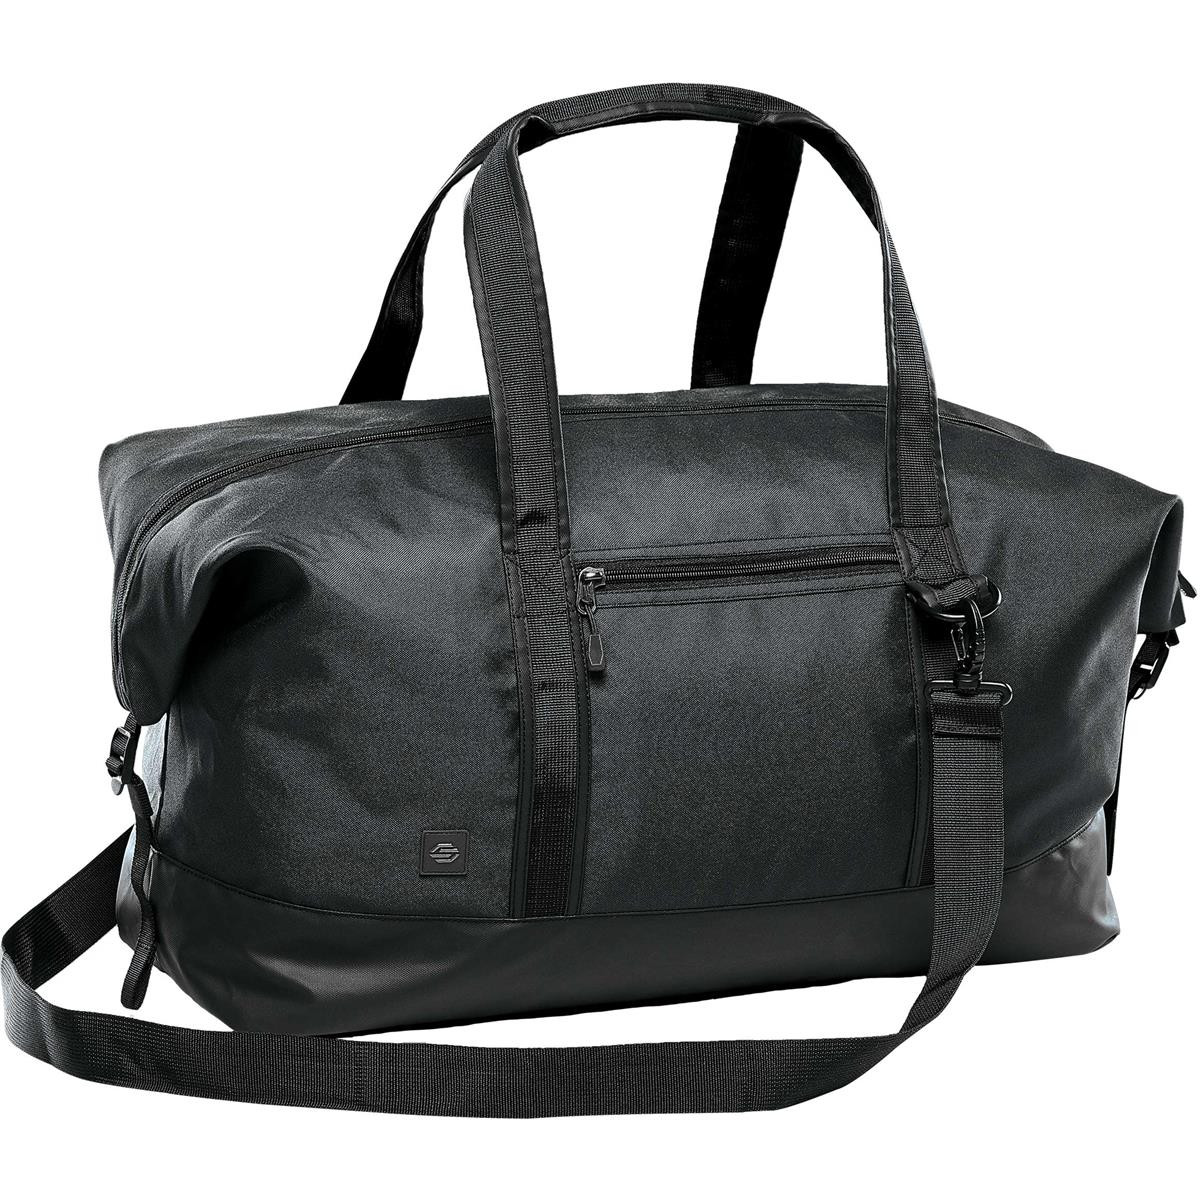 Promotional Soho Gear Bag - Grab-and-Go Carry Handles